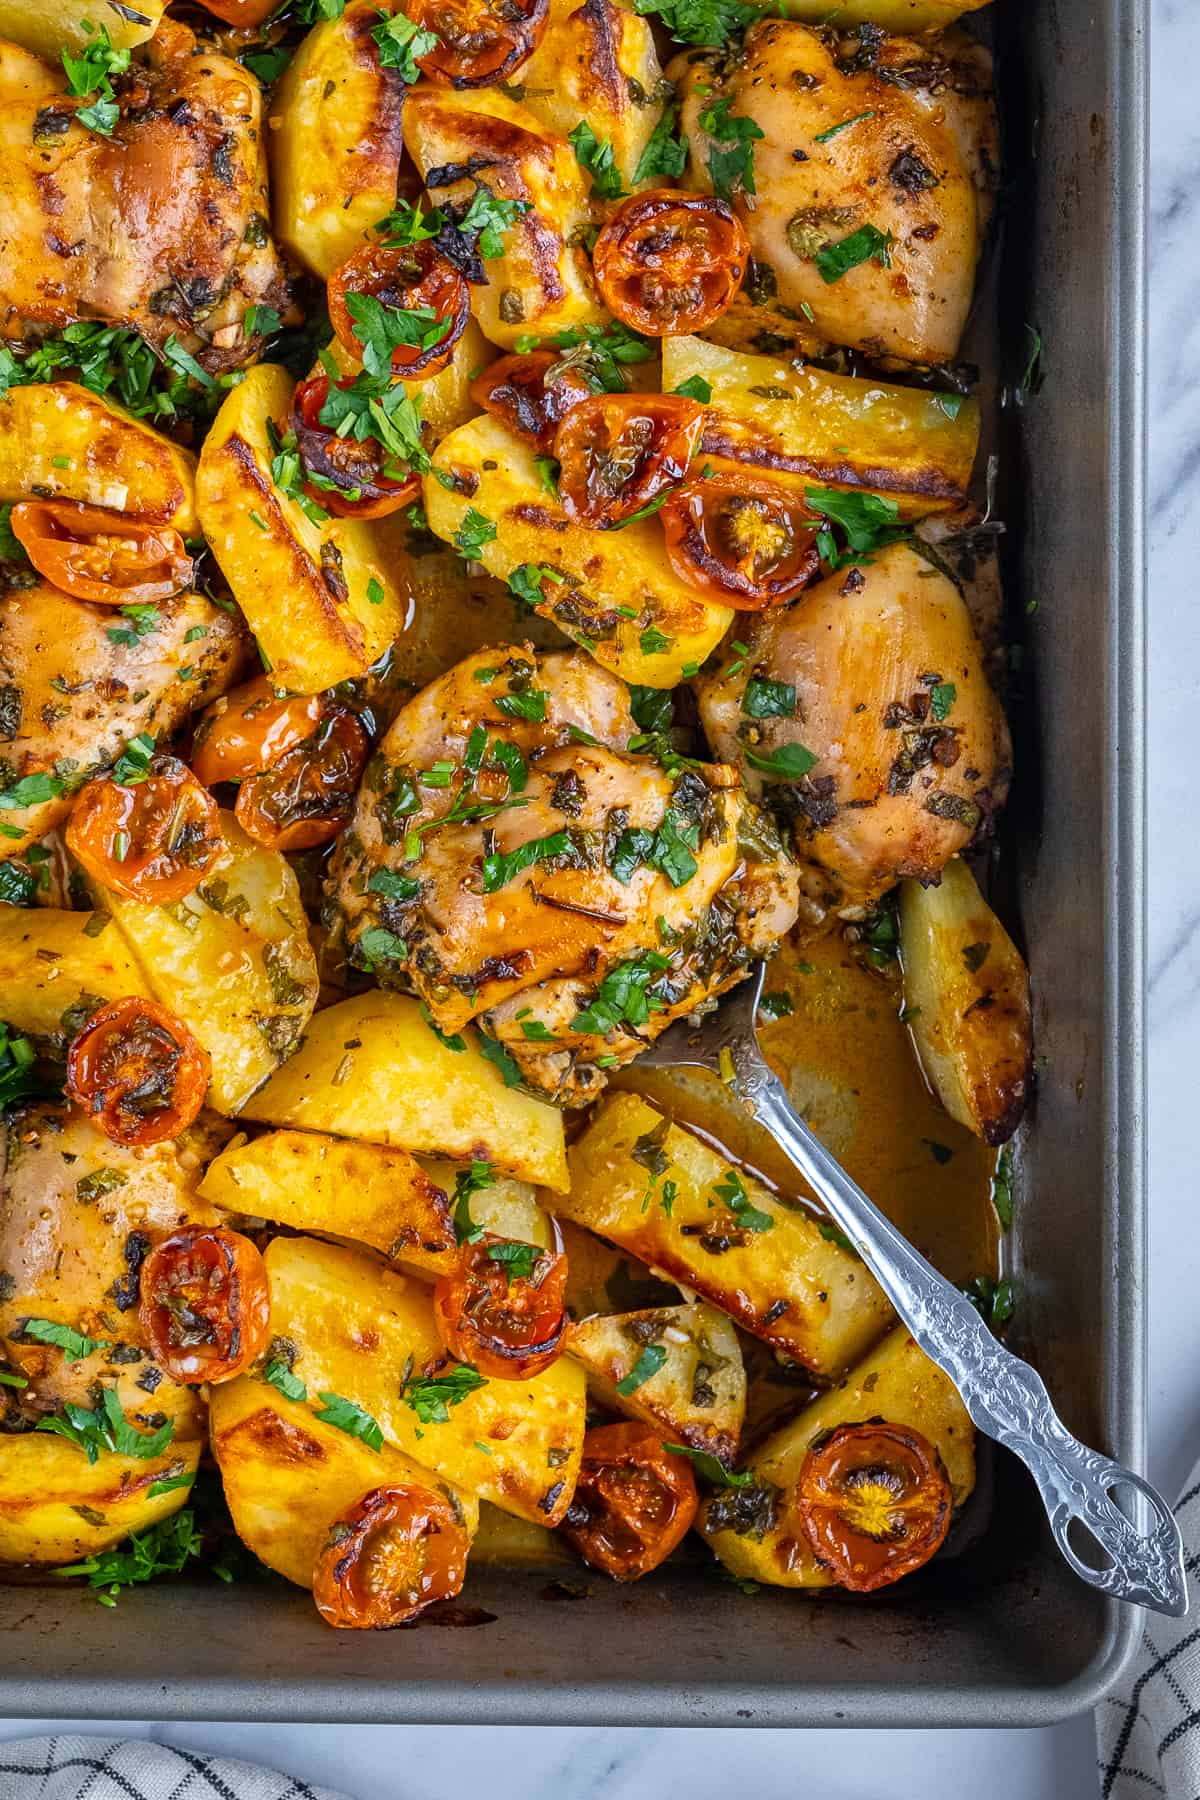 Boneless, skinless chicken thighs baked with potatoes in a baking pan.